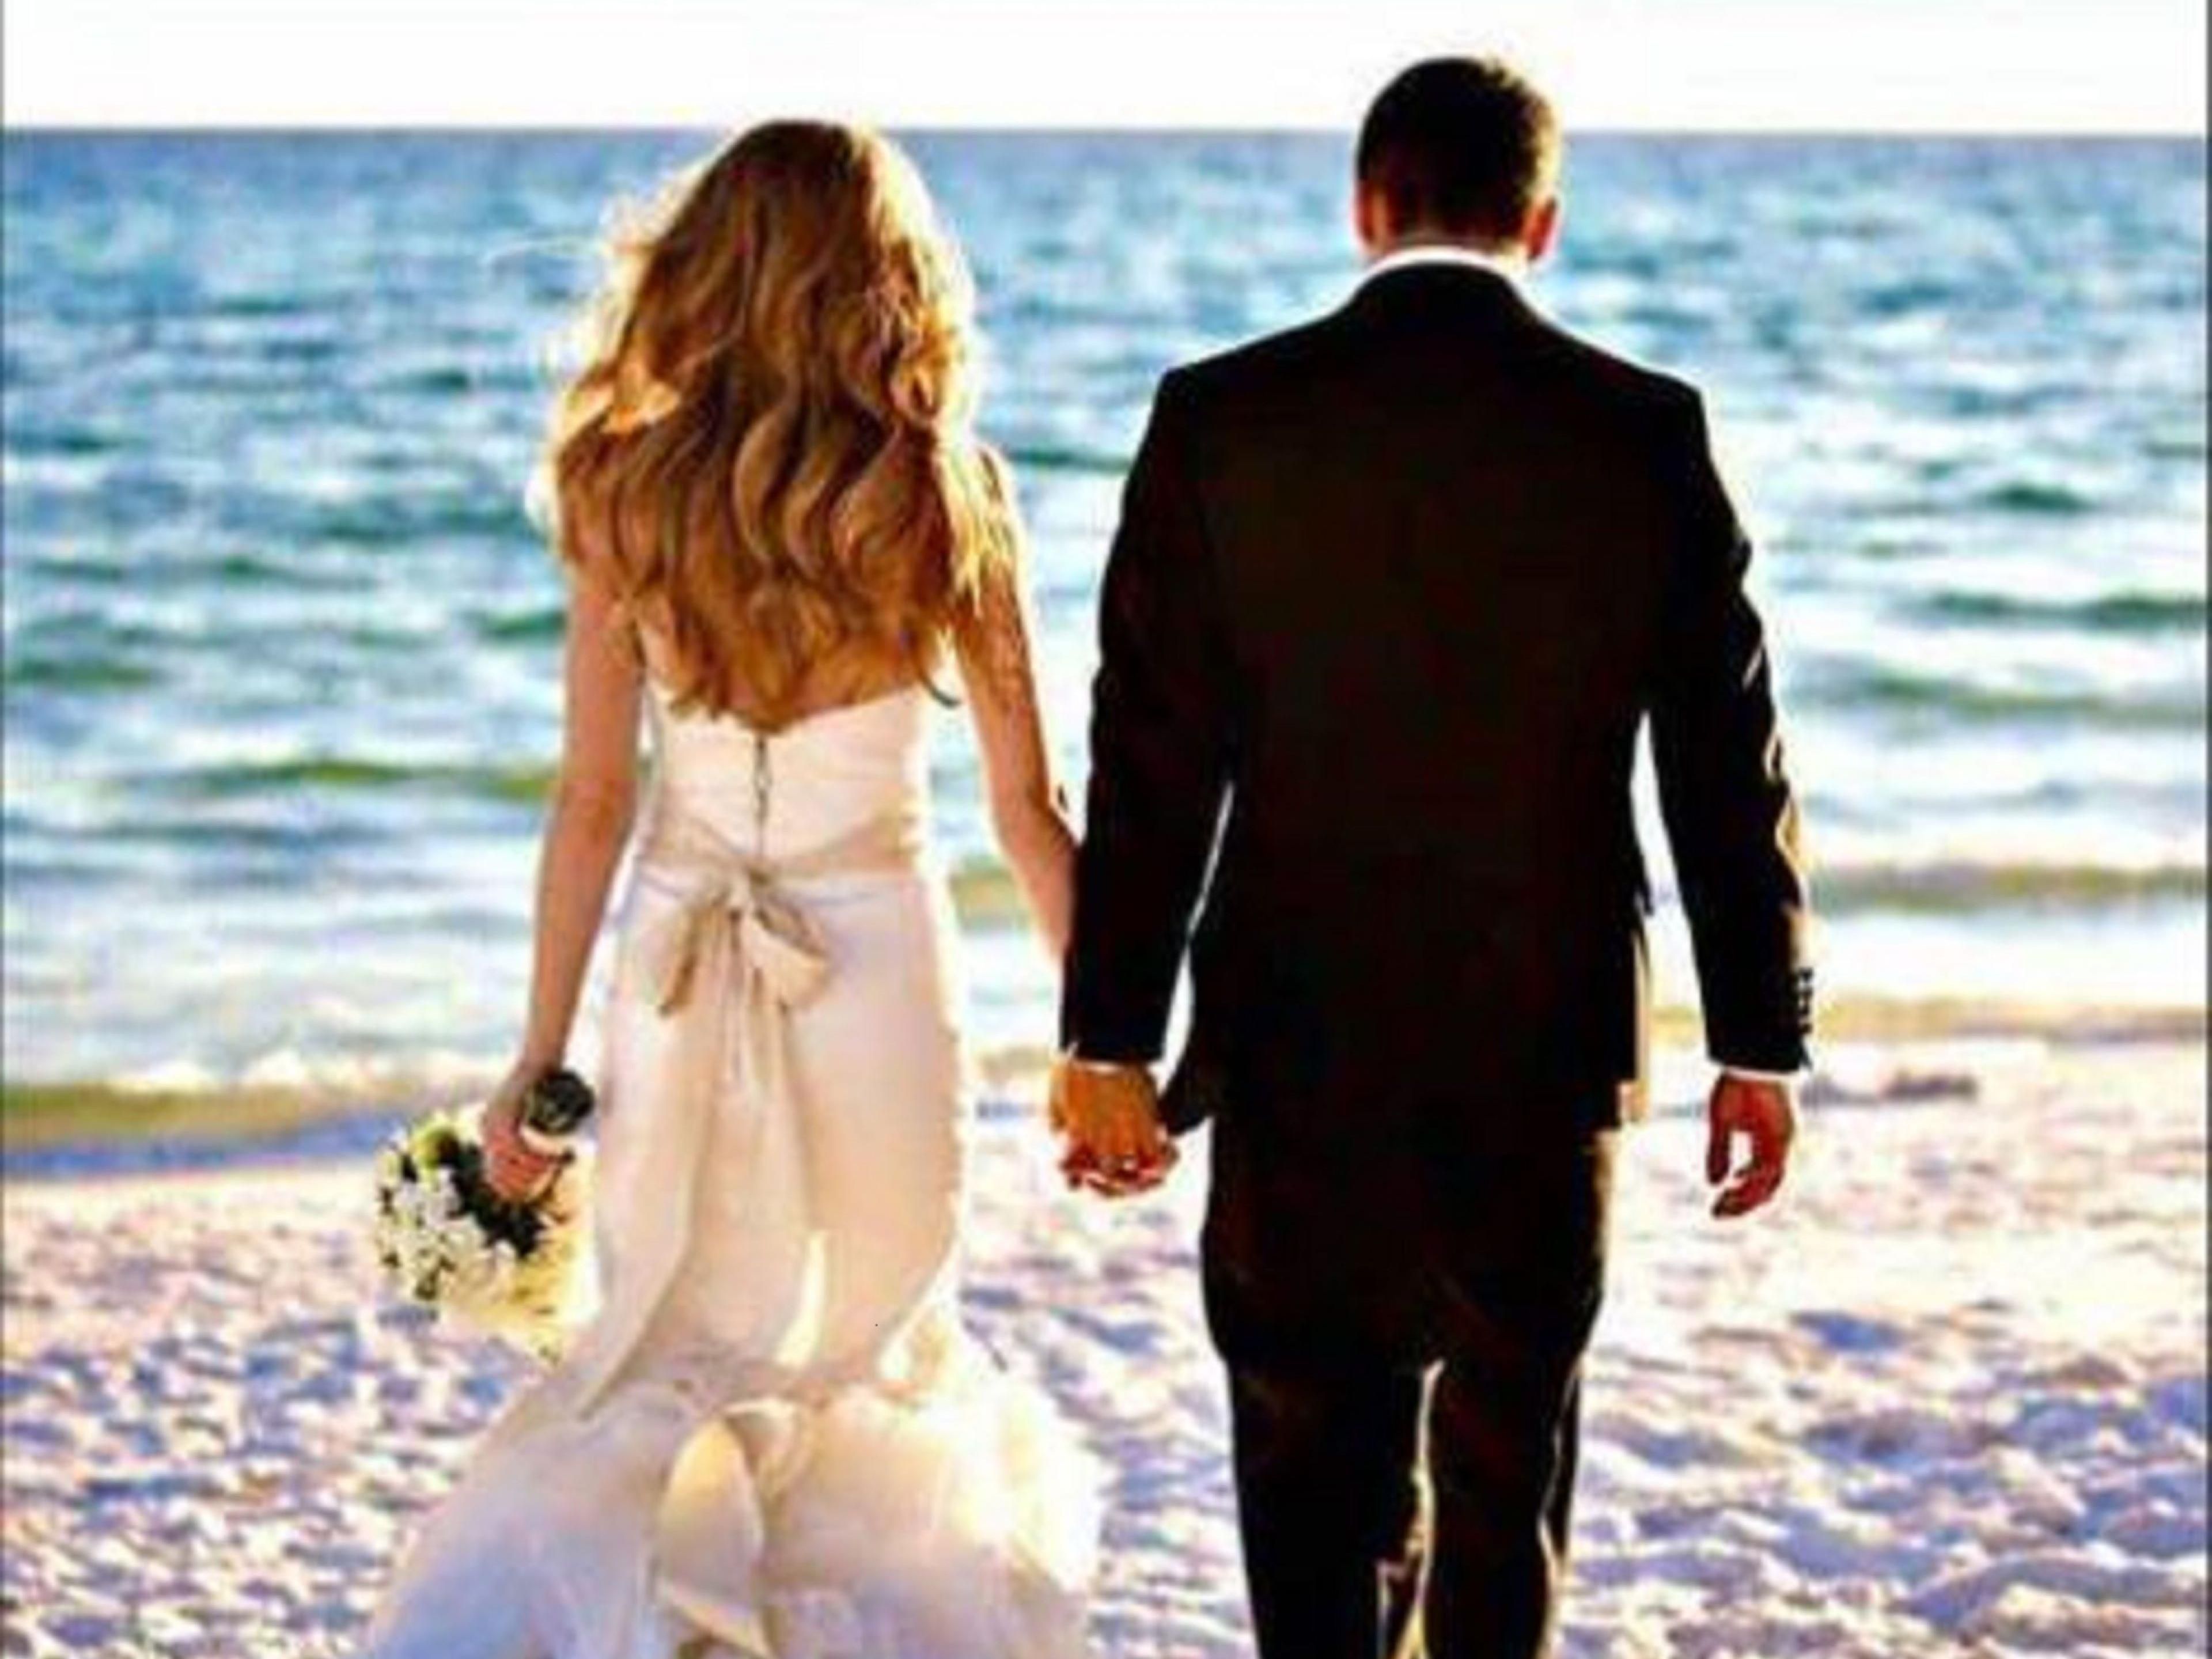 Nestled against the beautiful blue Atlantic Ocean and white sandy beaches, the Holiday Inn Miami Beach offers a gorgeous South Beach waterfront locale for saying your “I do’s.”  